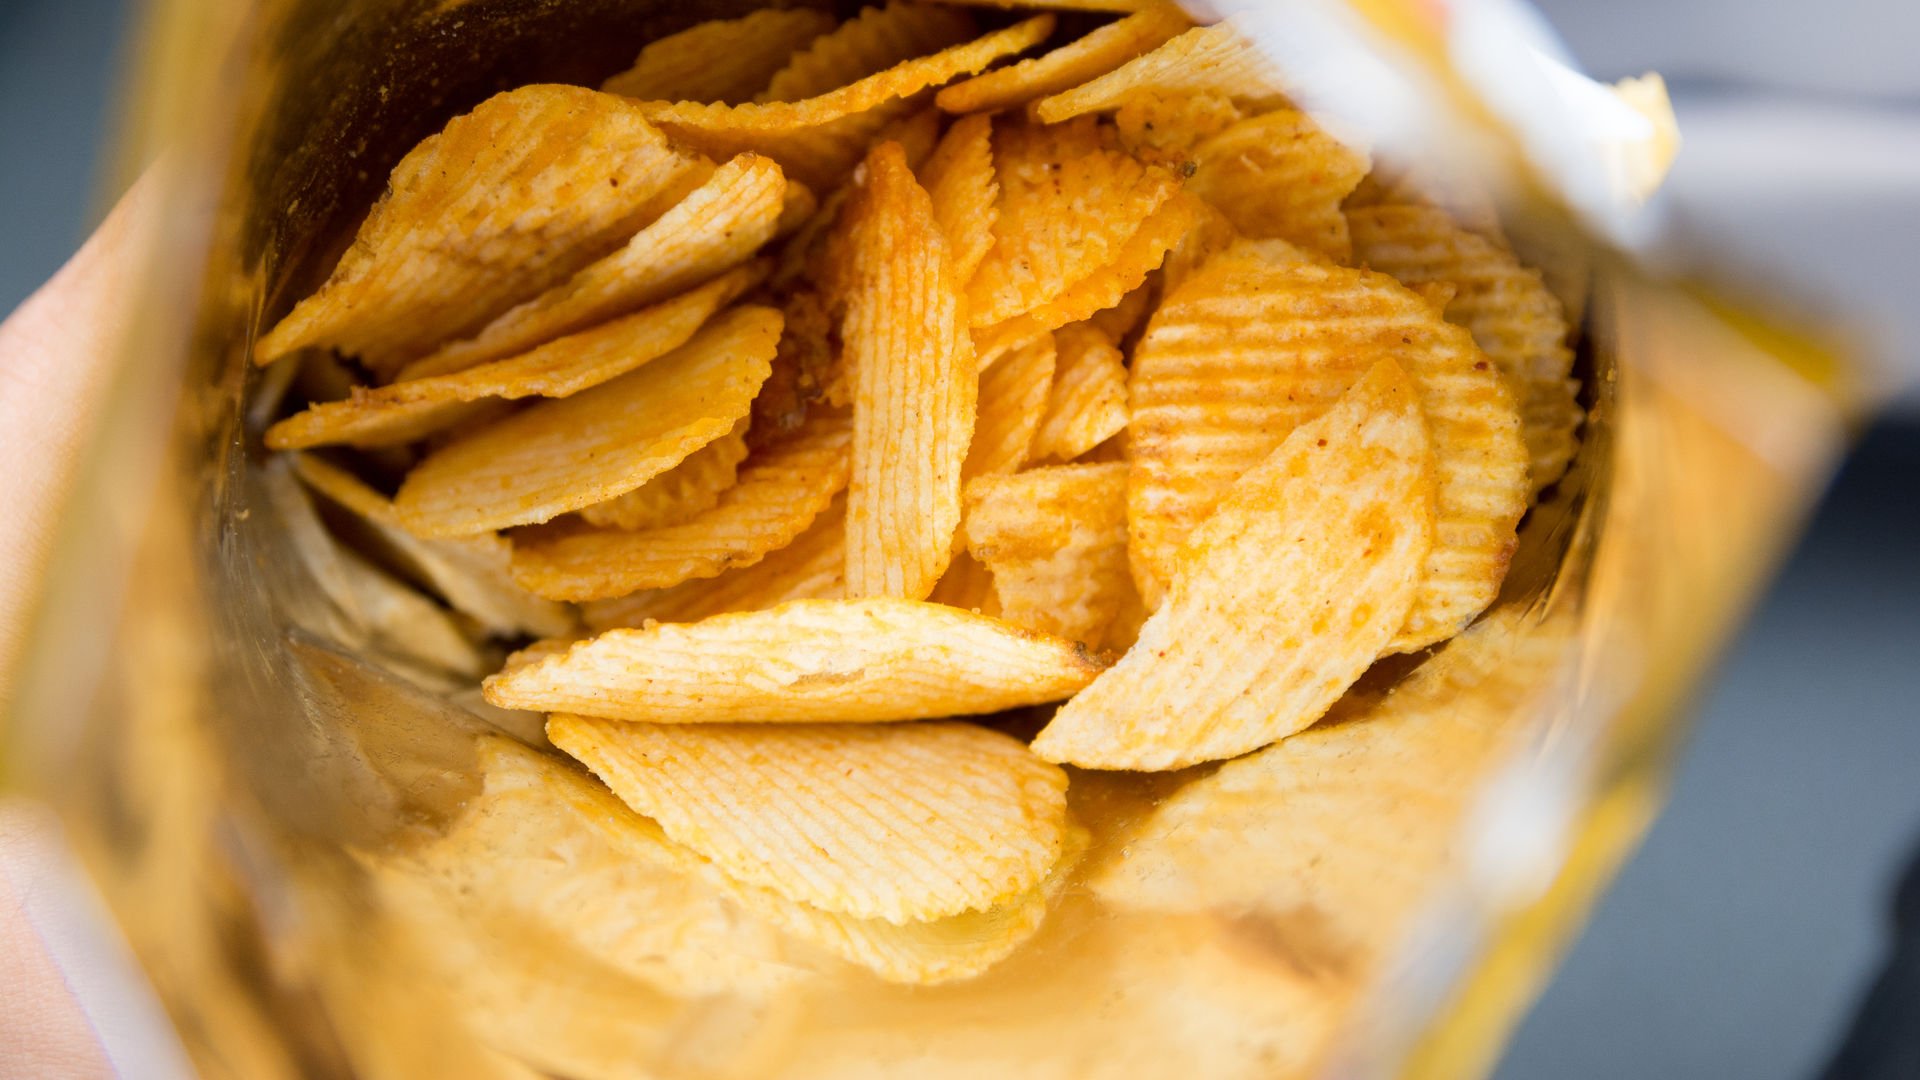 Chips and crisps